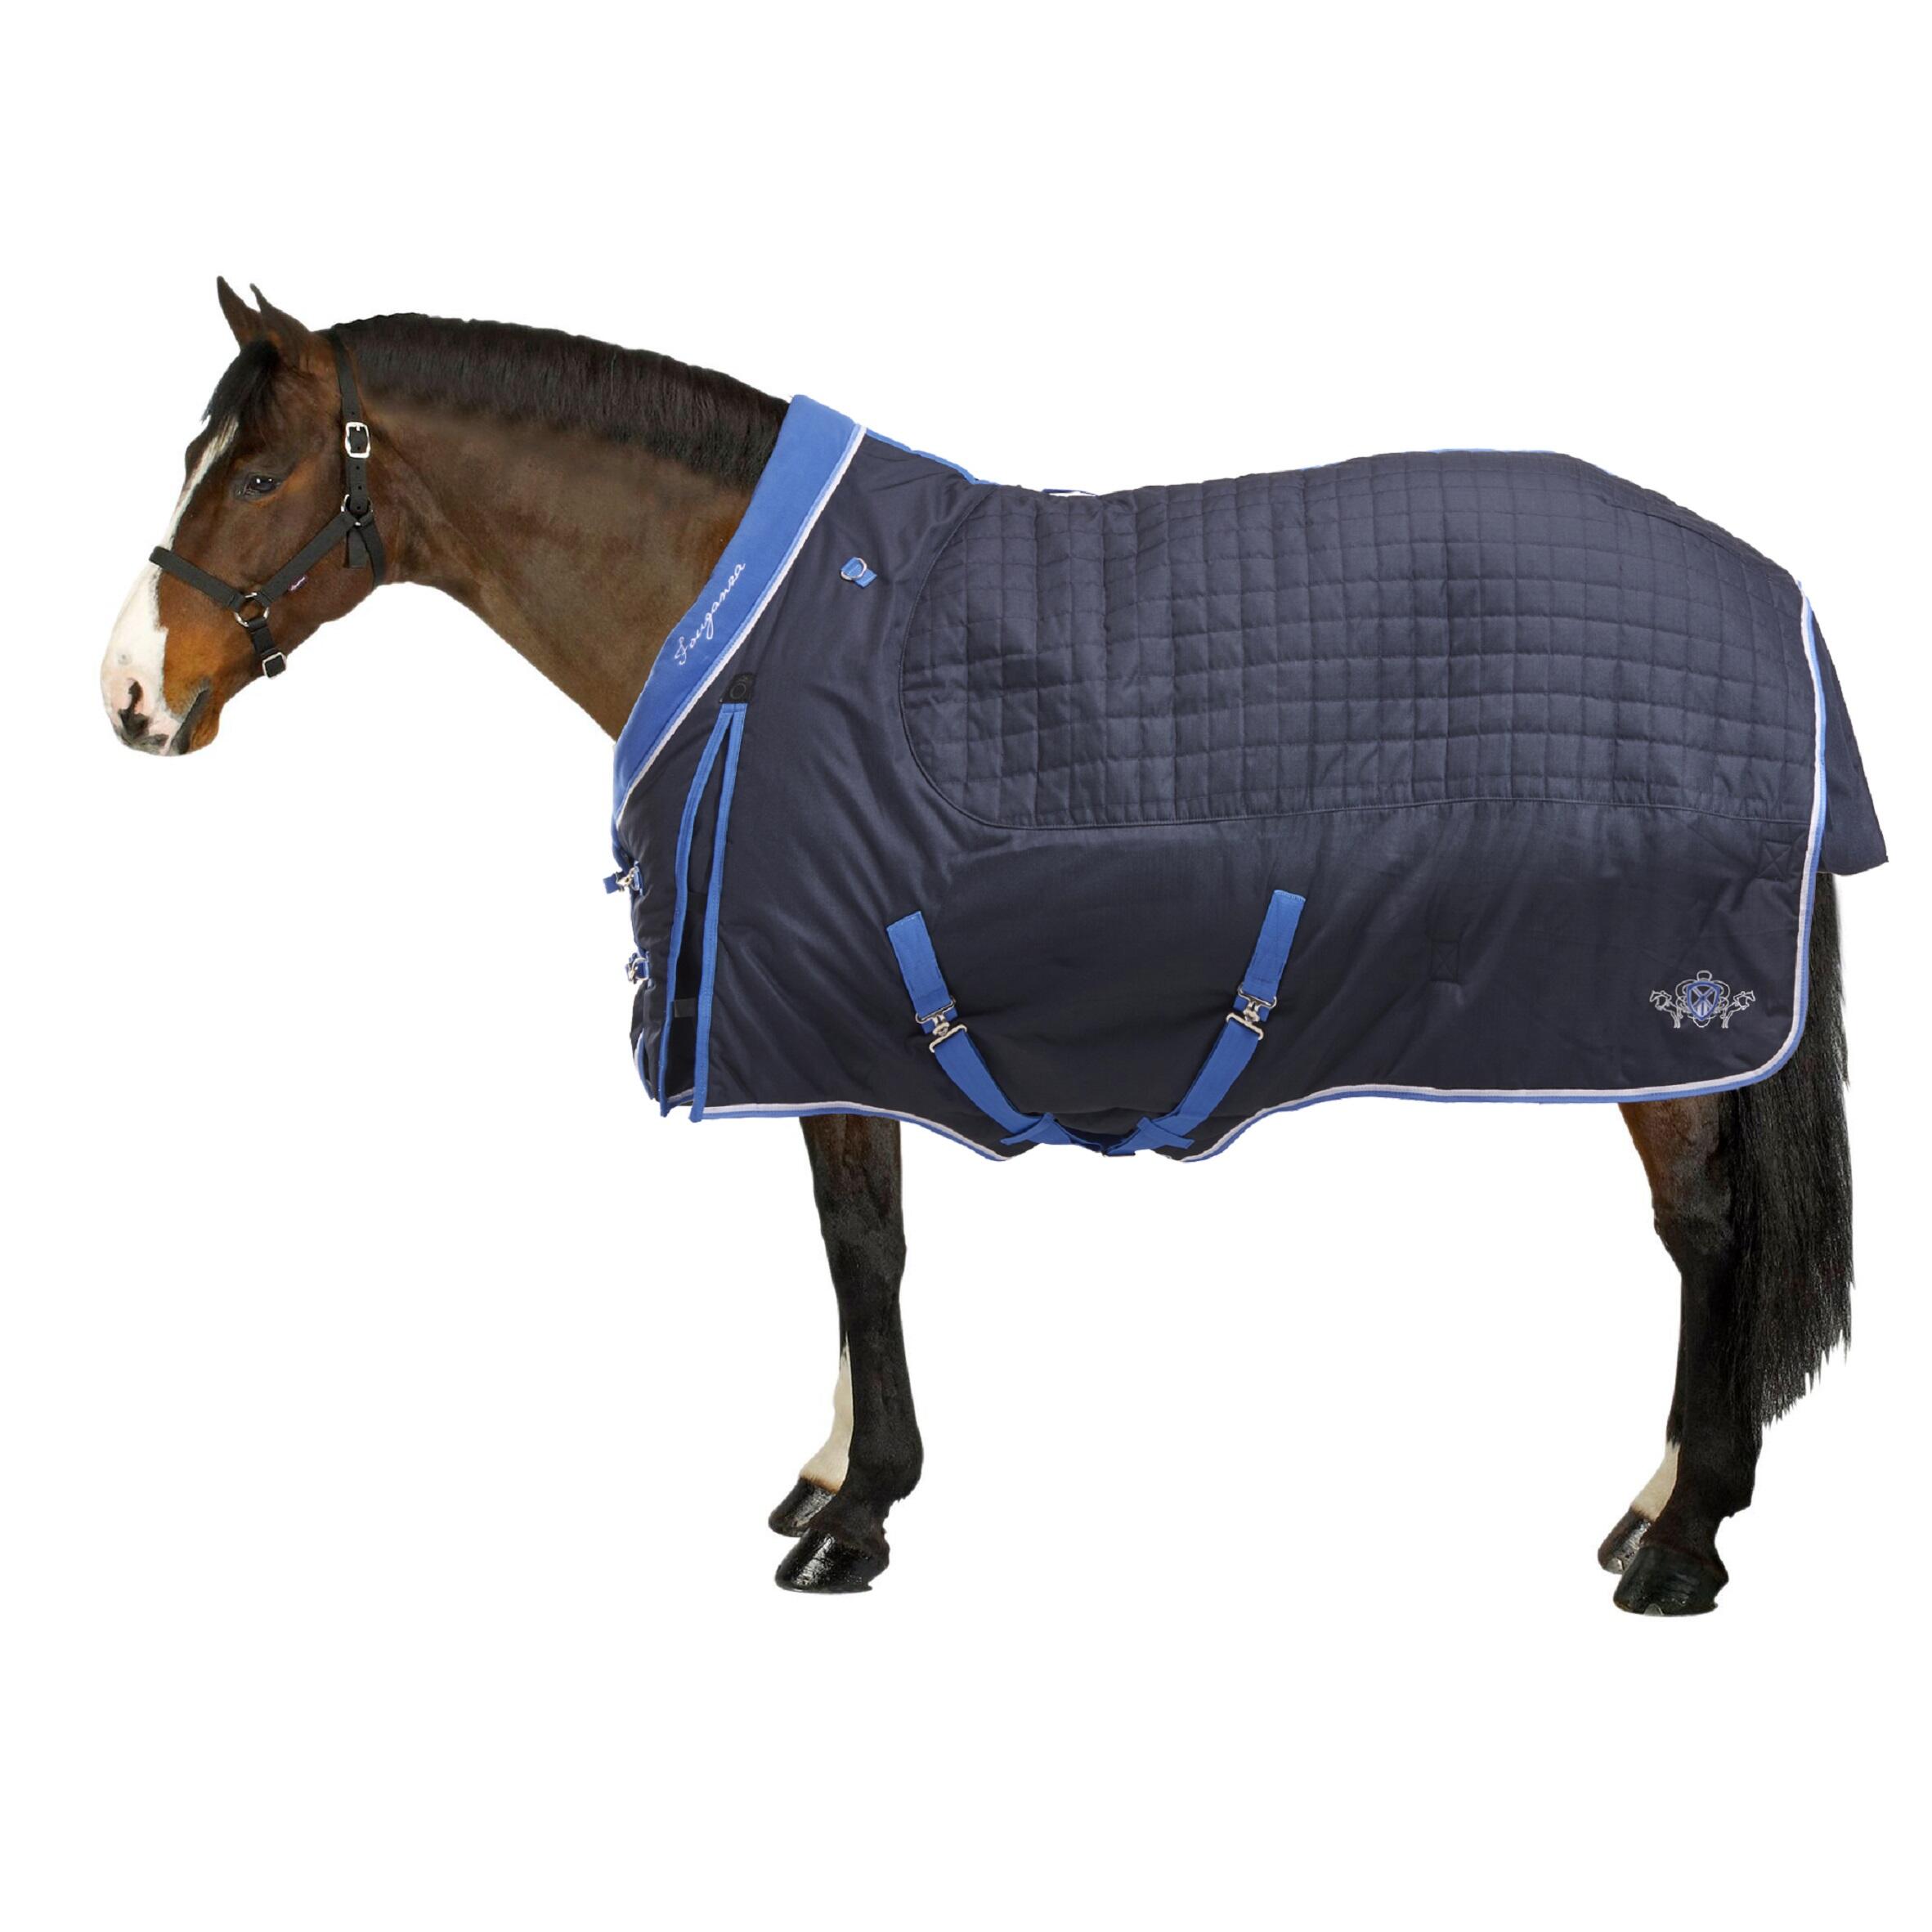 FOUGANZA Horse Riding Stable Rug 400 For Horse And Pony - Blue